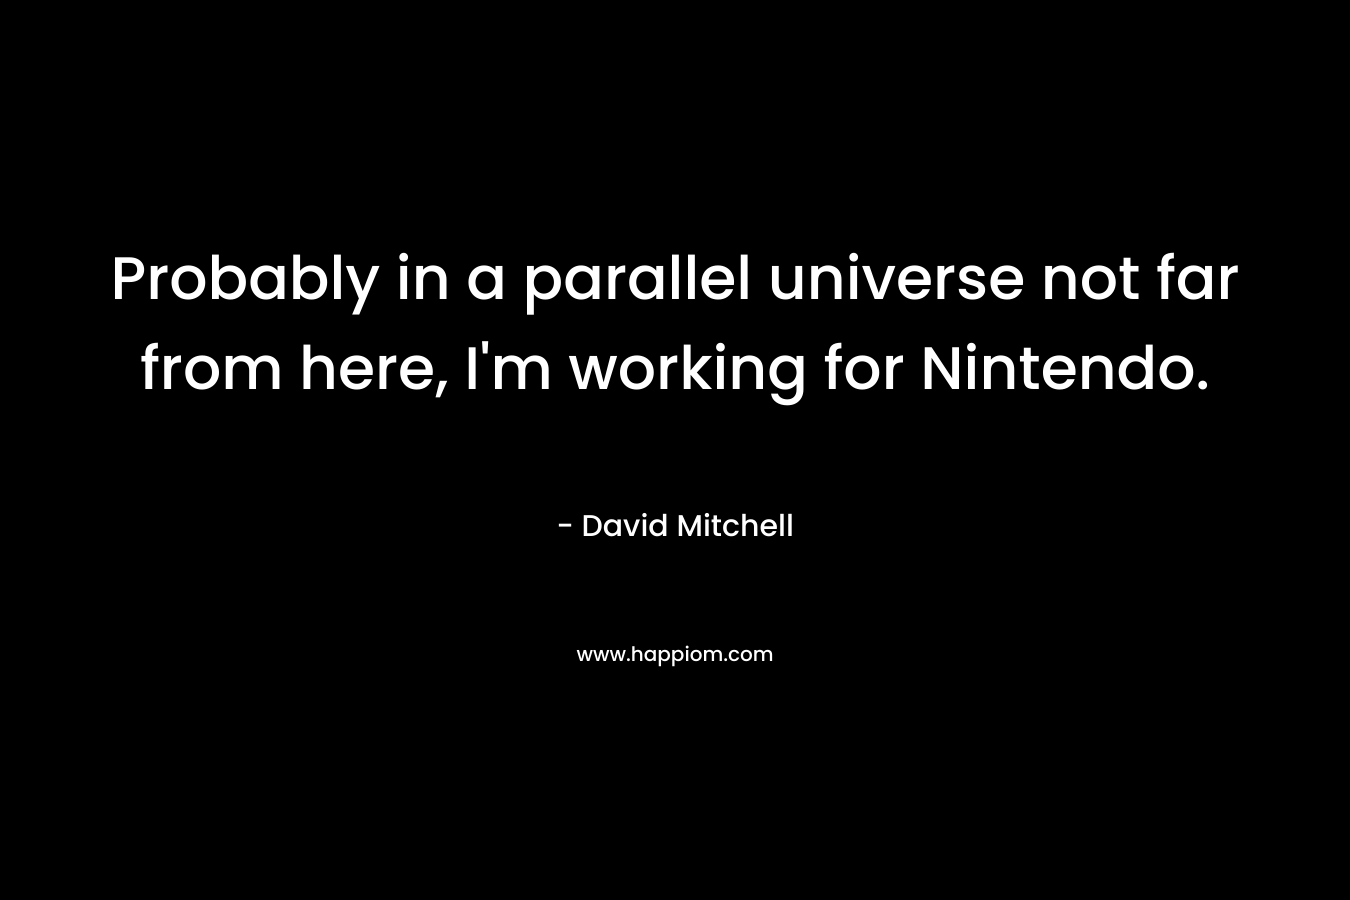 Probably in a parallel universe not far from here, I’m working for Nintendo. – David Mitchell